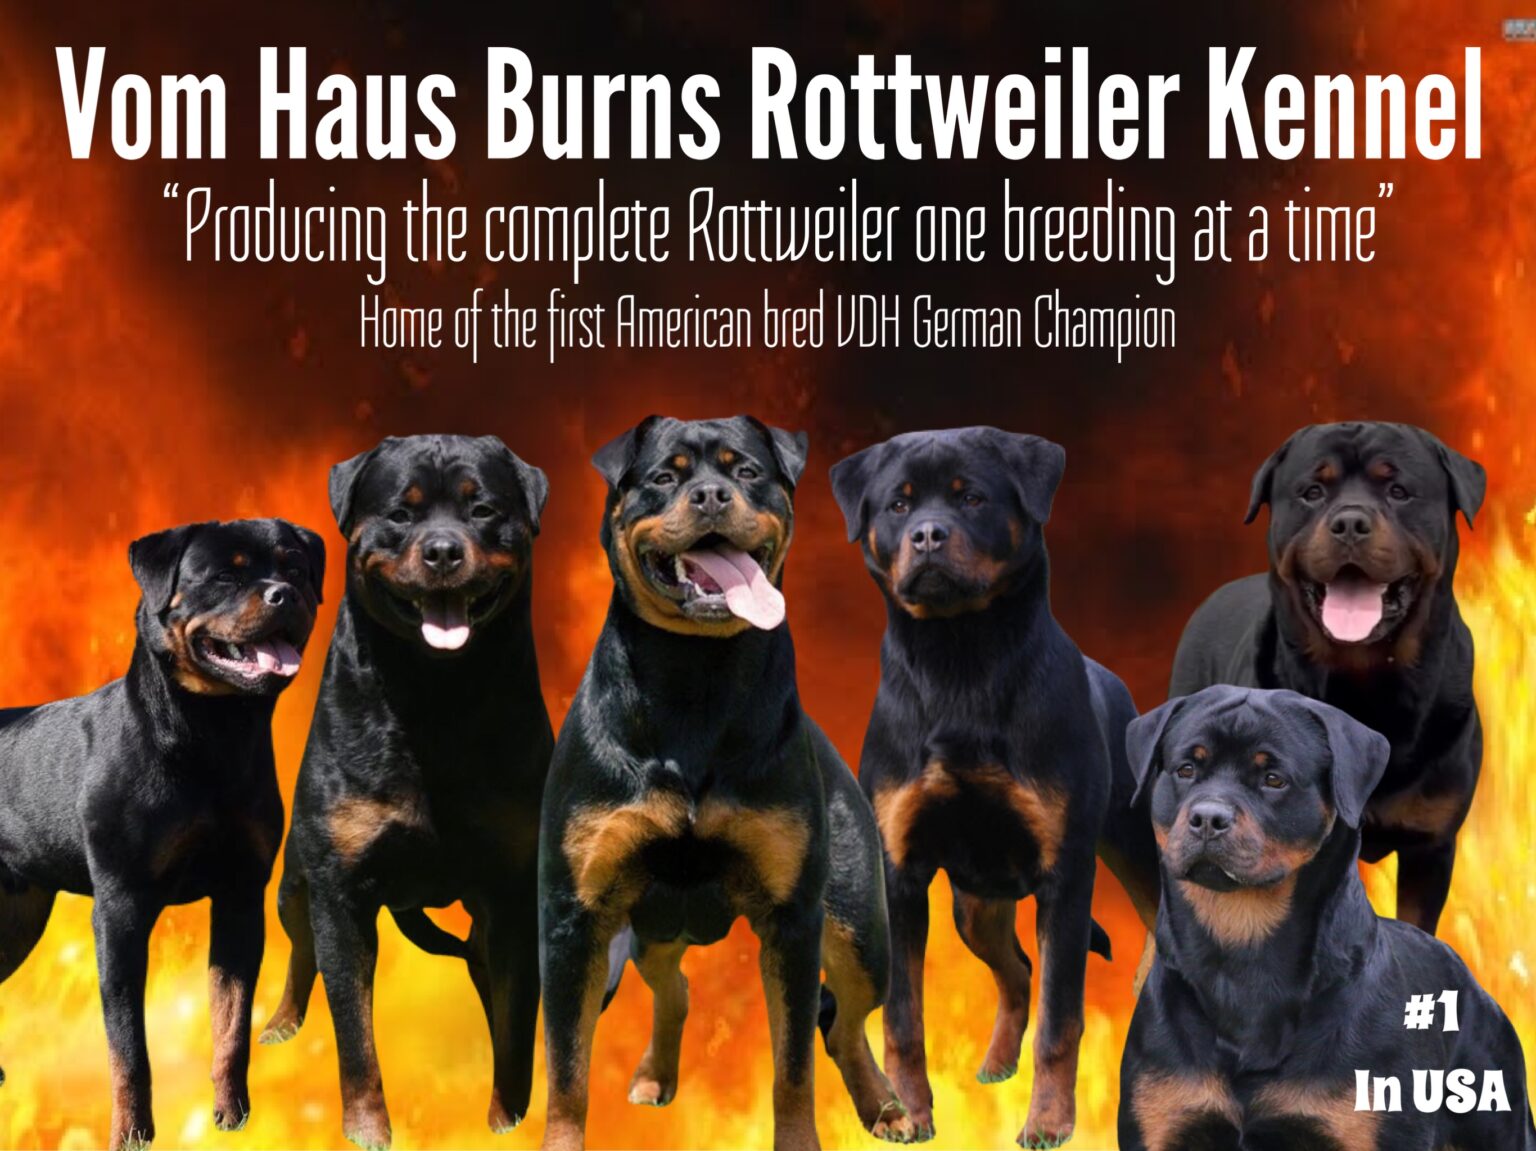 biologie na school Helder op Vom Haus Burns – "Producing the complete Rottweiler one breeding at a time"